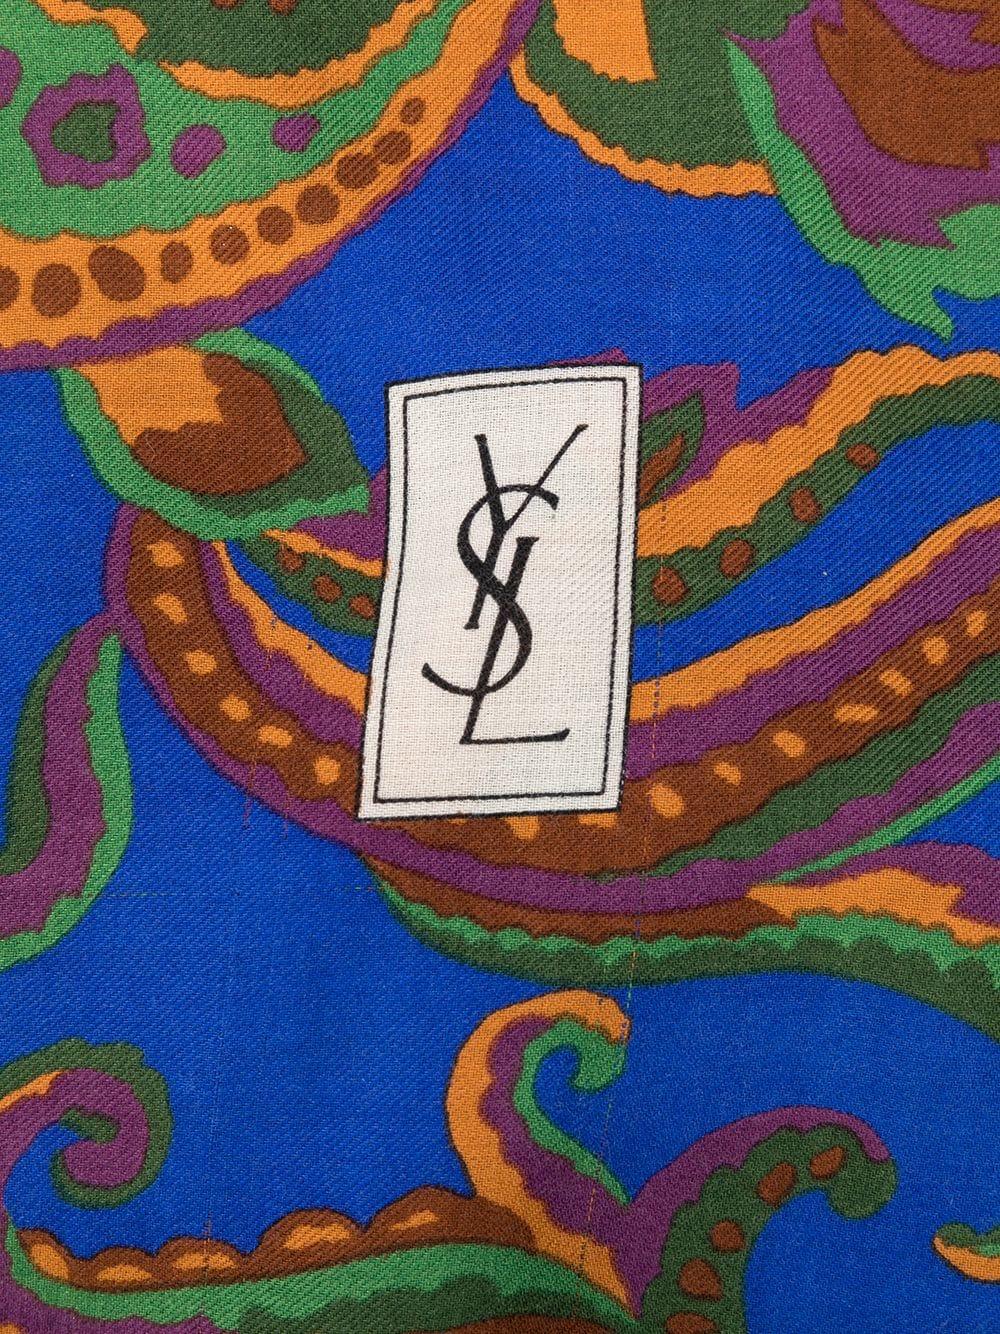 Yves Saint Laurent large silk and wool scarf featuring green, blue, yellow all-over floral print, frayed edge, a printed logo on. 50% wool & 50% silk
In excellent vintage condition. Made in France.
53.1in. (135cm) X 44 in.53.1in. (135cm)
We